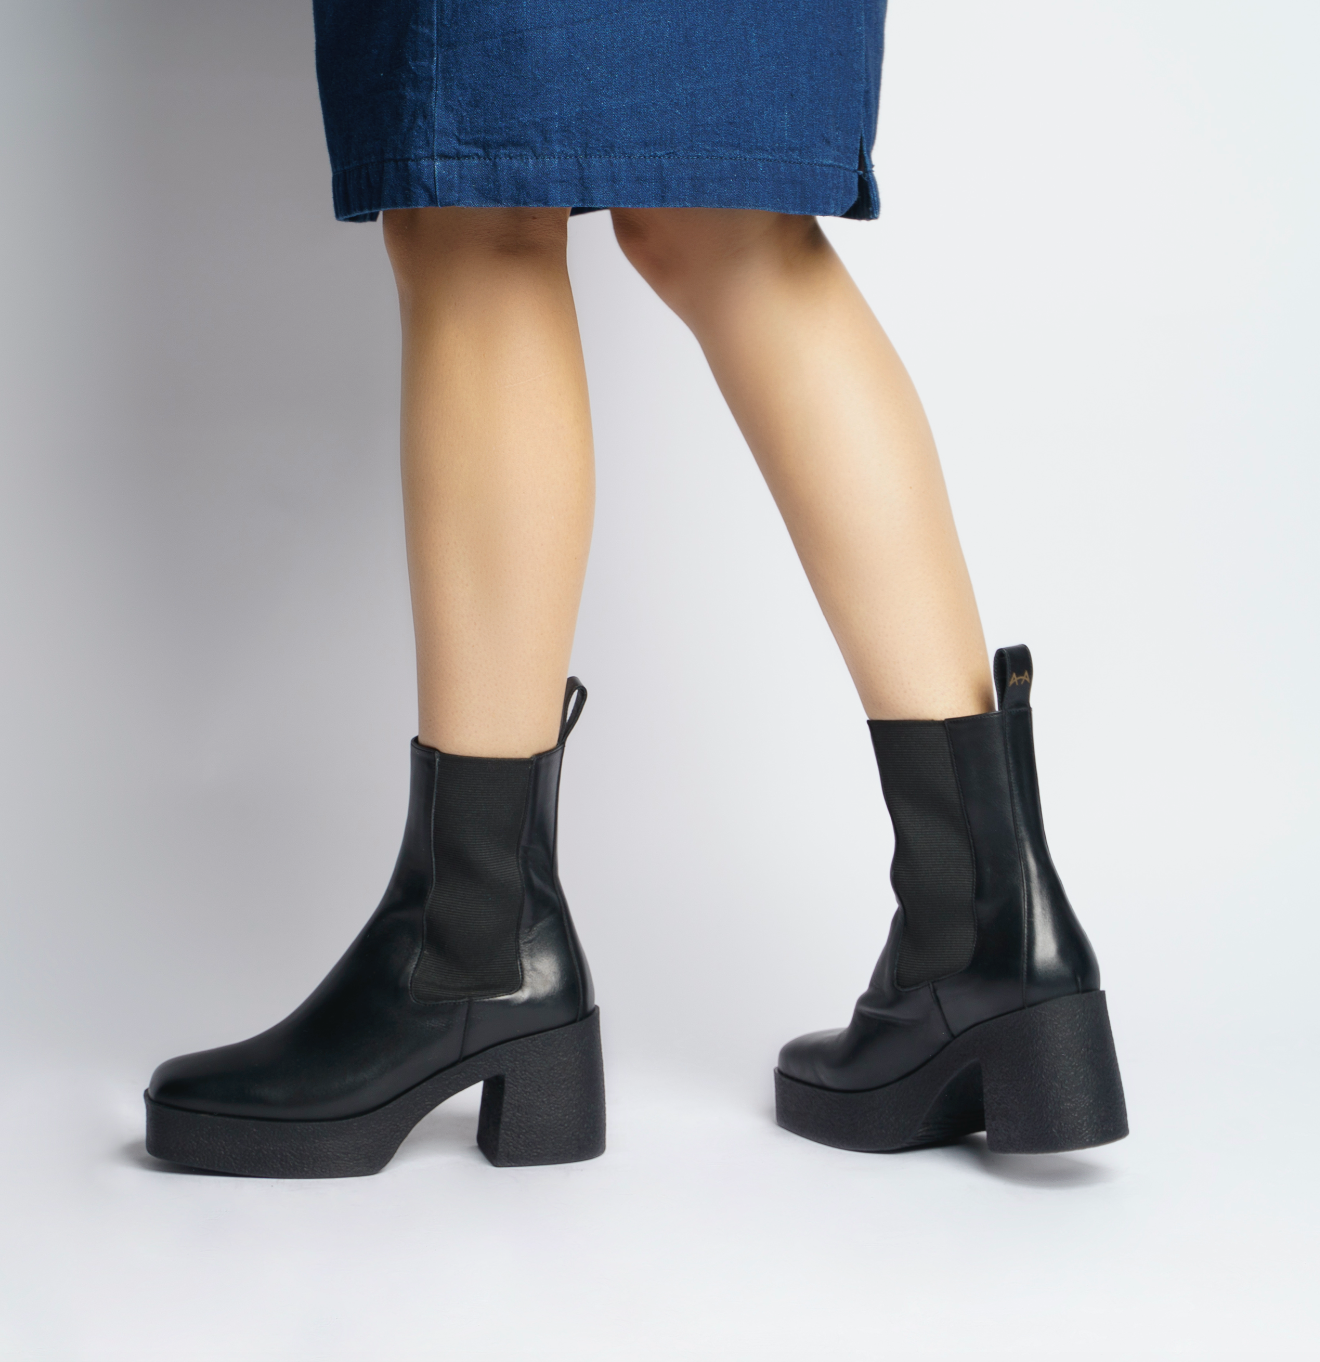 Momo Black Leather Chelsea Boots 20077-04-01 - 5